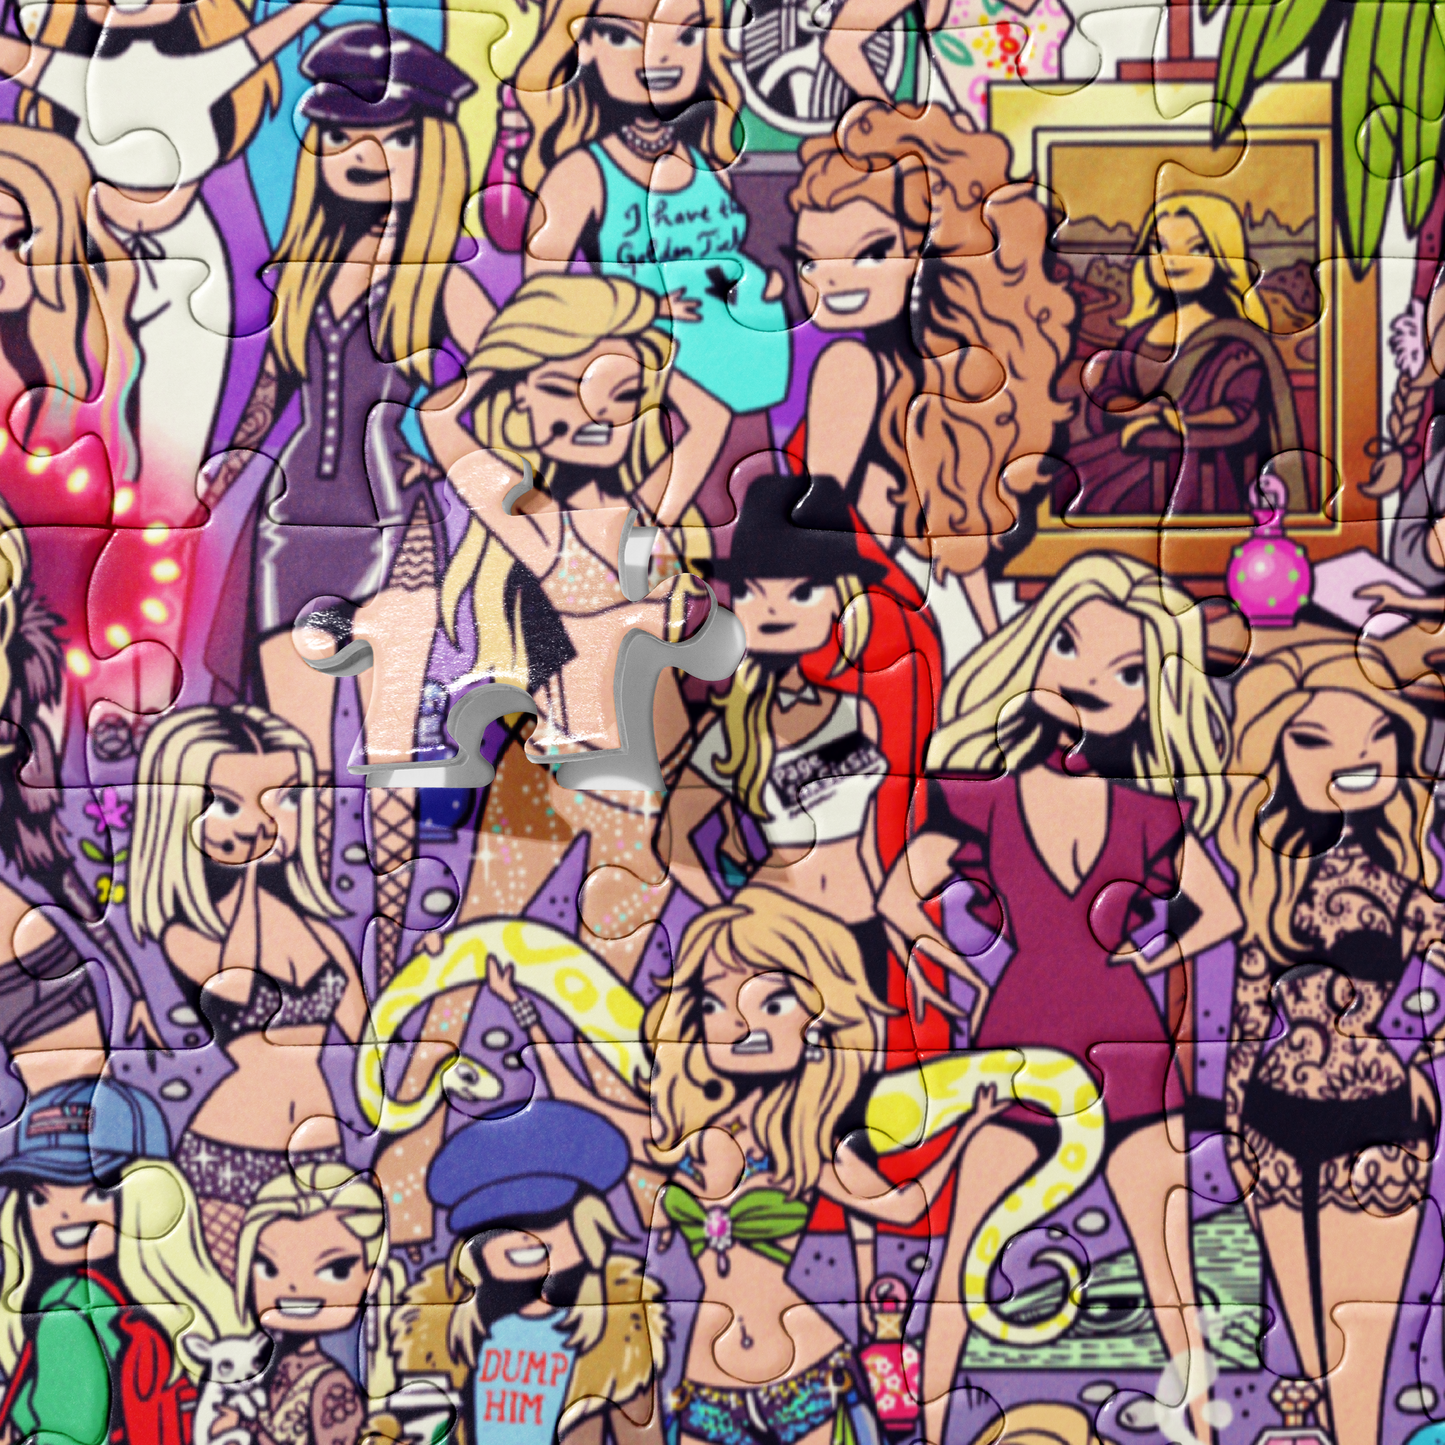 "Clone World" - Britney Spears "Where's Waldo" Style - Jigsaw Puzzle (US ONLY)